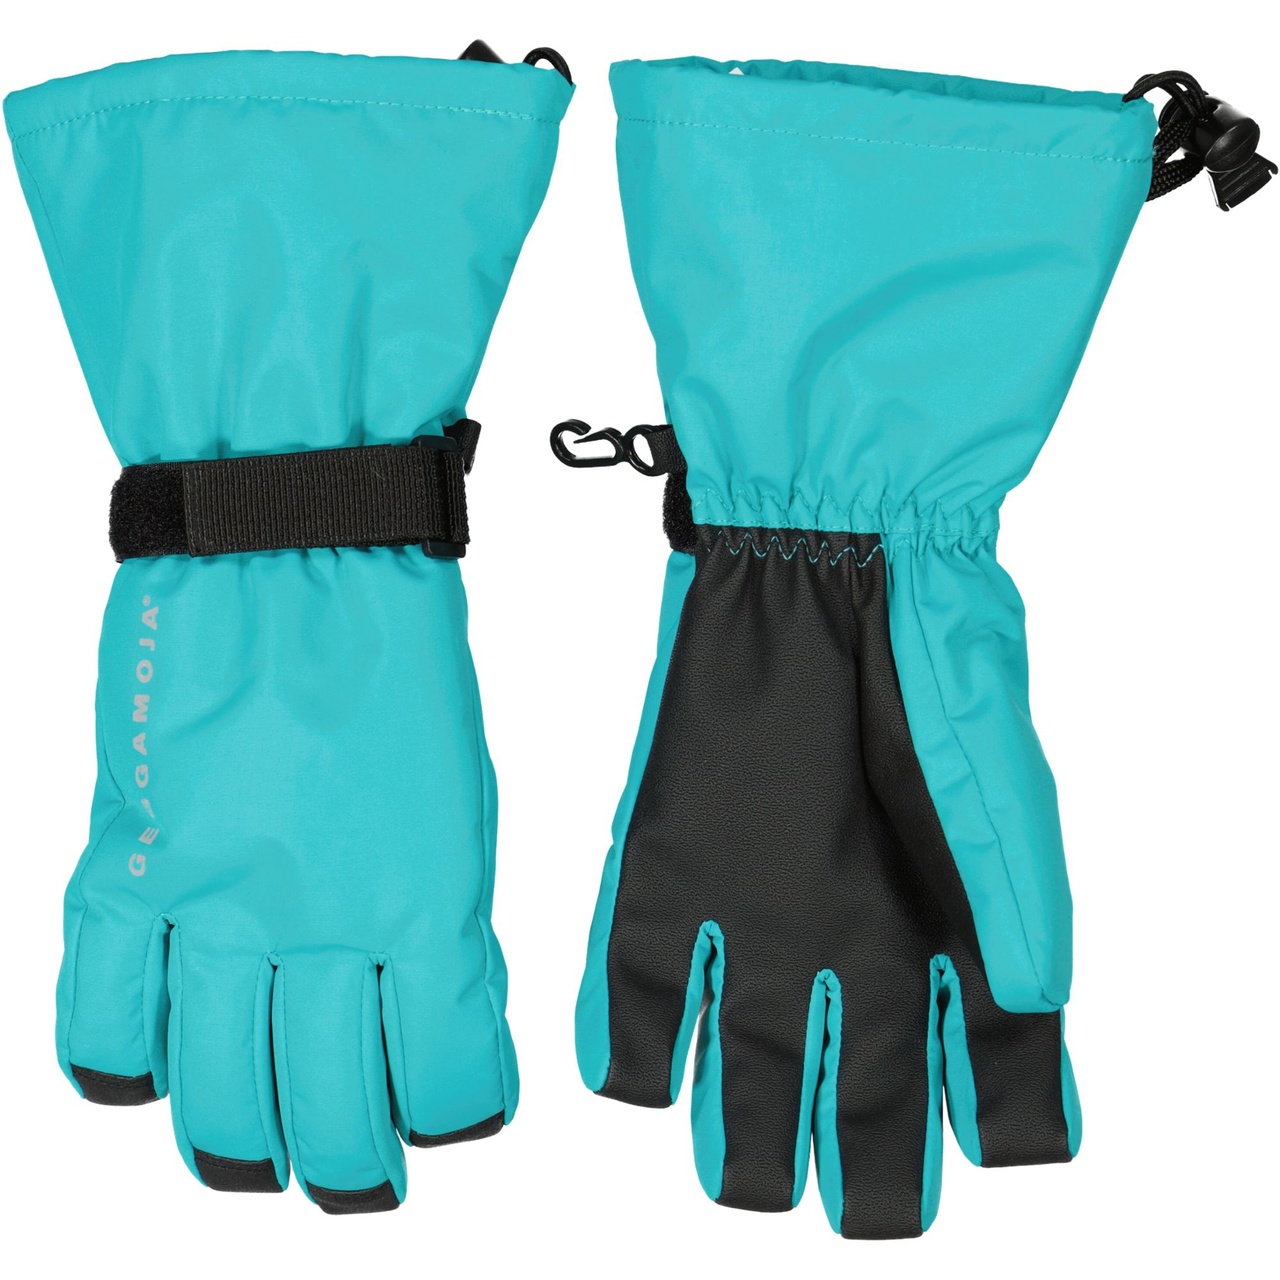 Winter gloves Turquoise  6-7 y